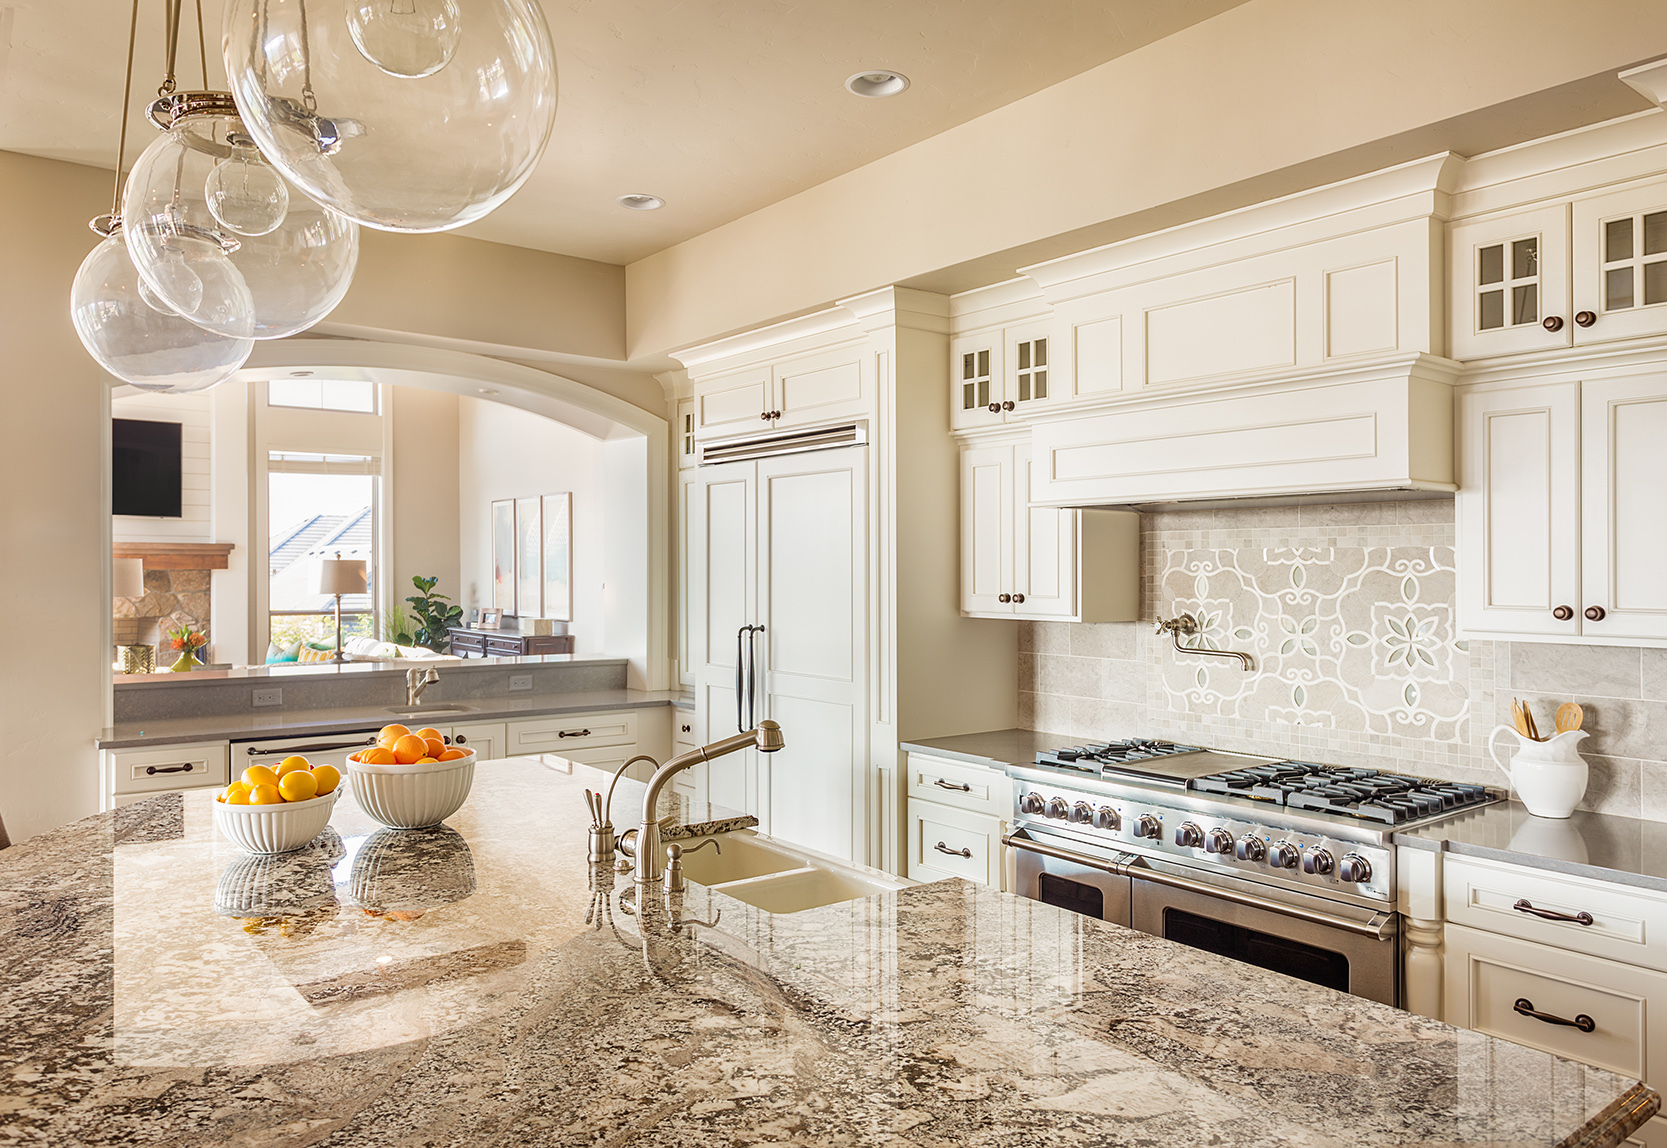 Kitchen and Bathroom Remodels: Necessity or Nicety?